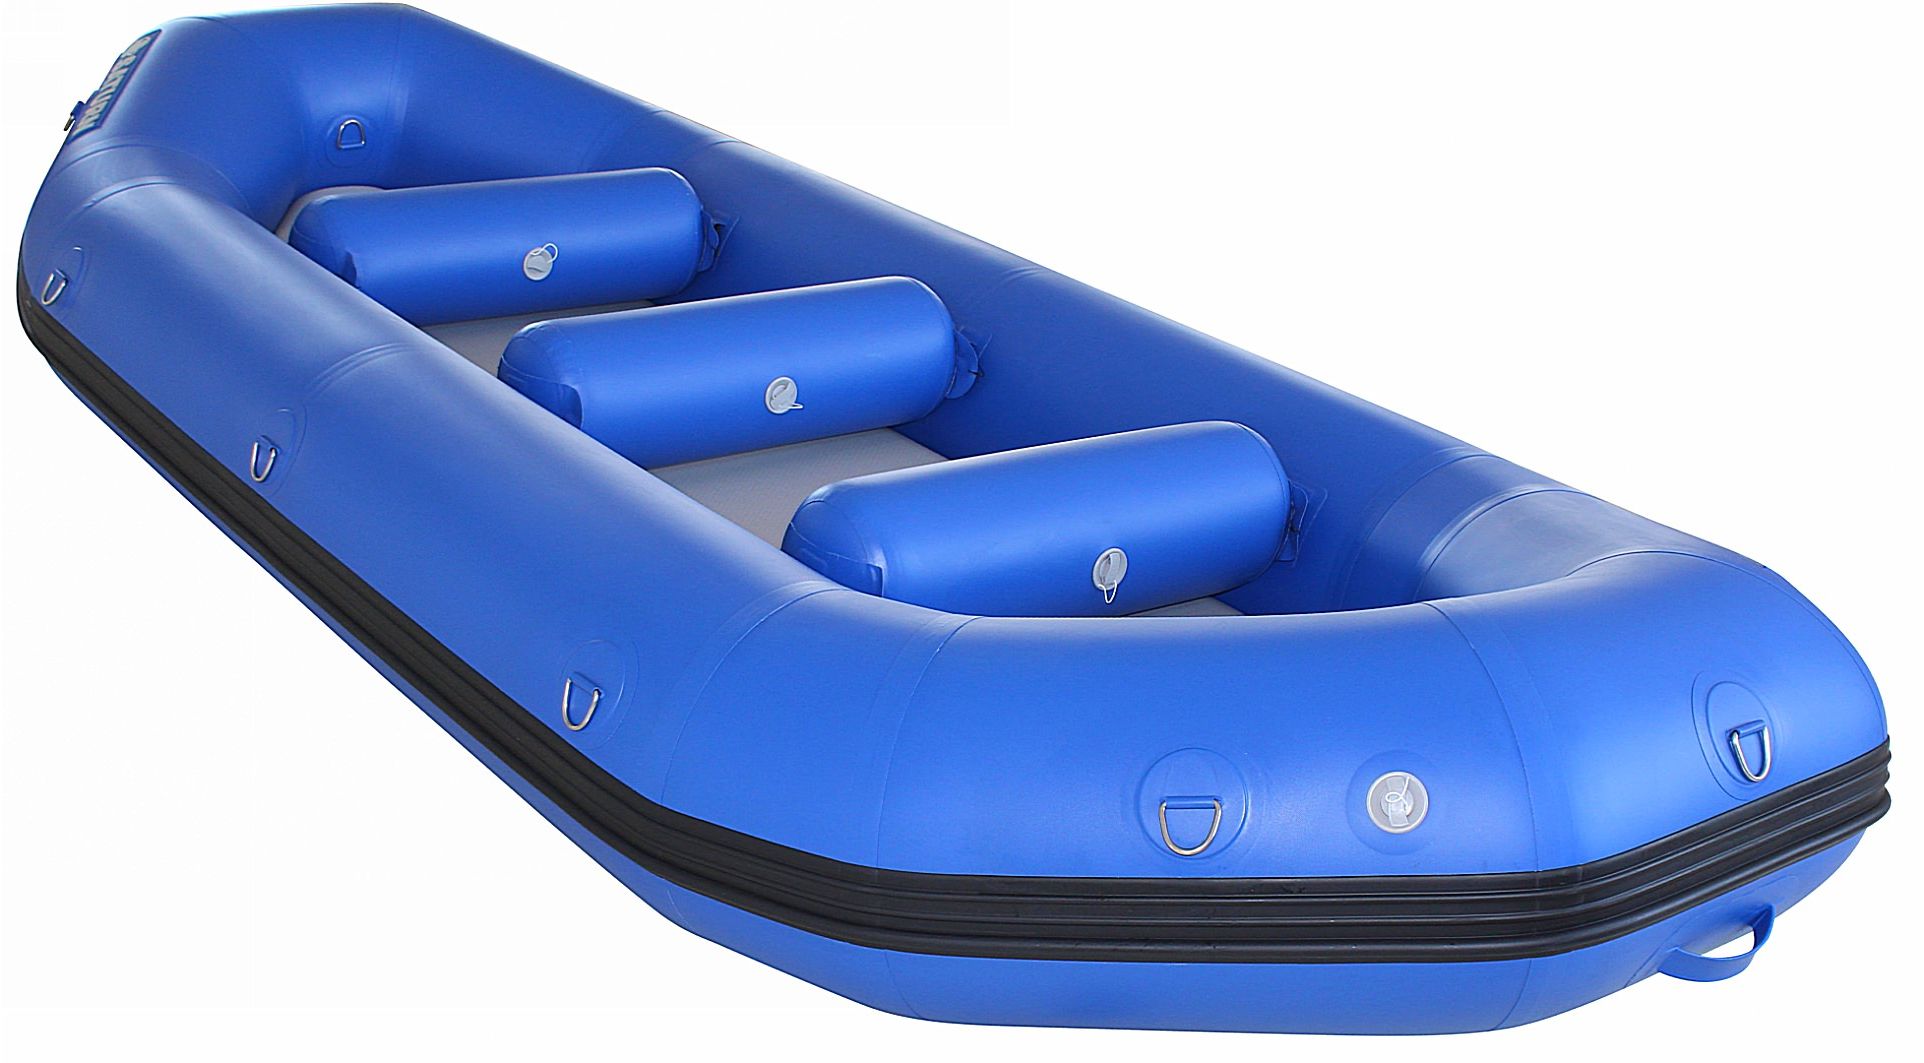 13' Saturn White Water River Raft for whitewater rafting.